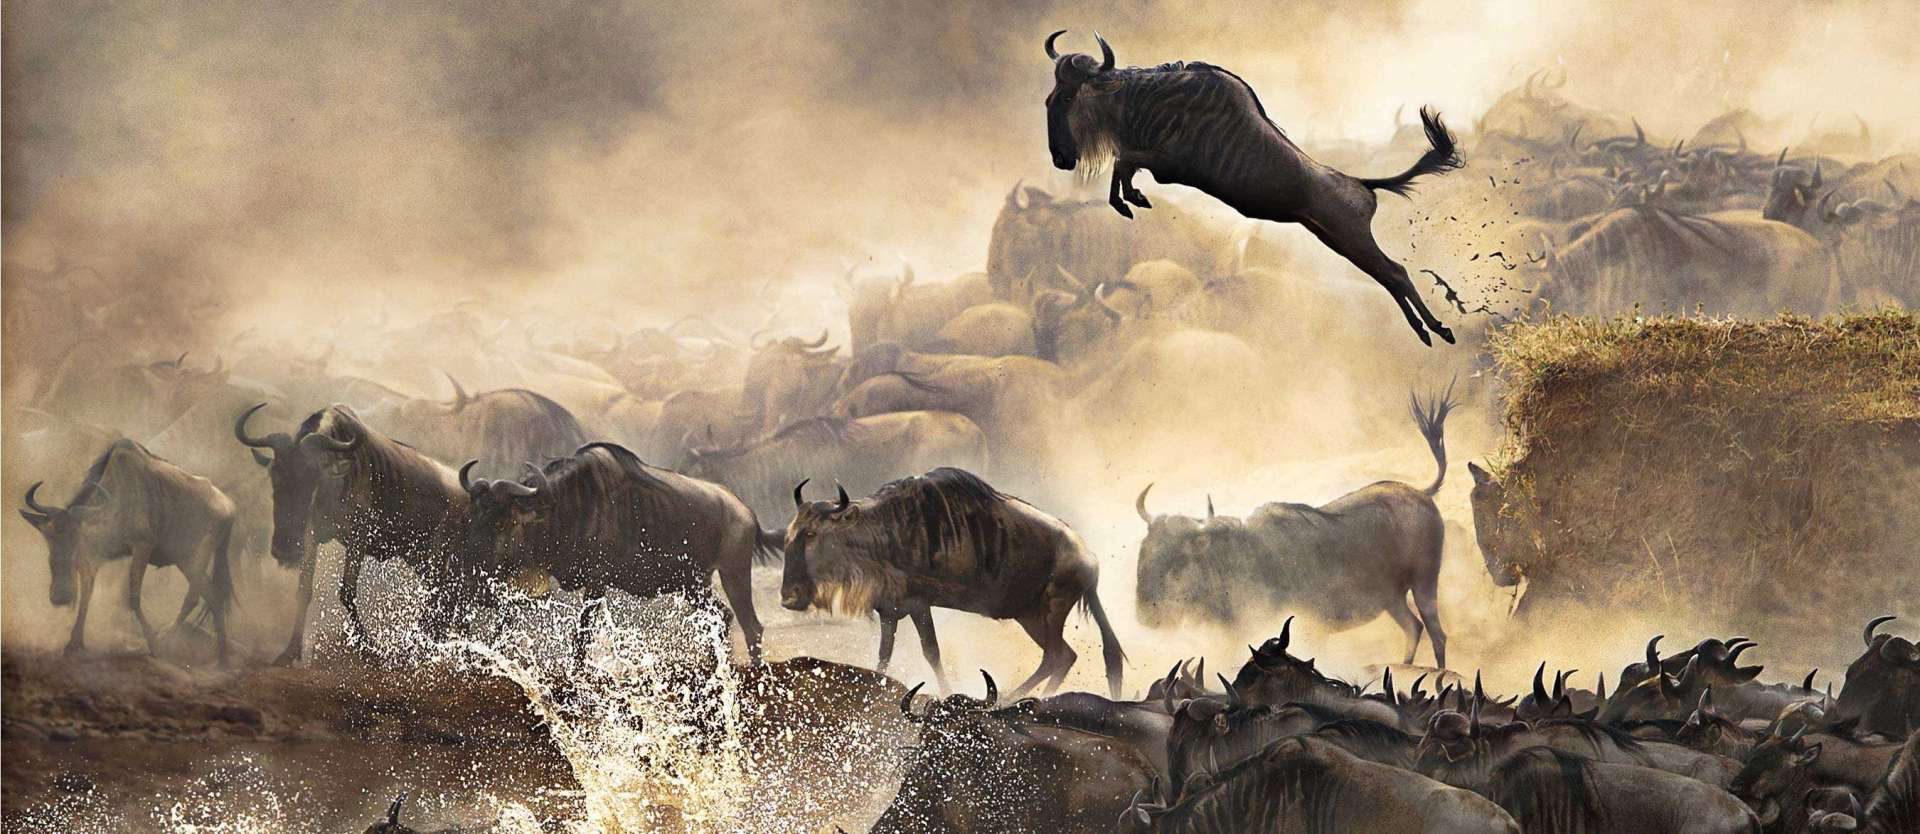 Reasons for the Great Wildebeest Migration | Why do wildebeests migrate?